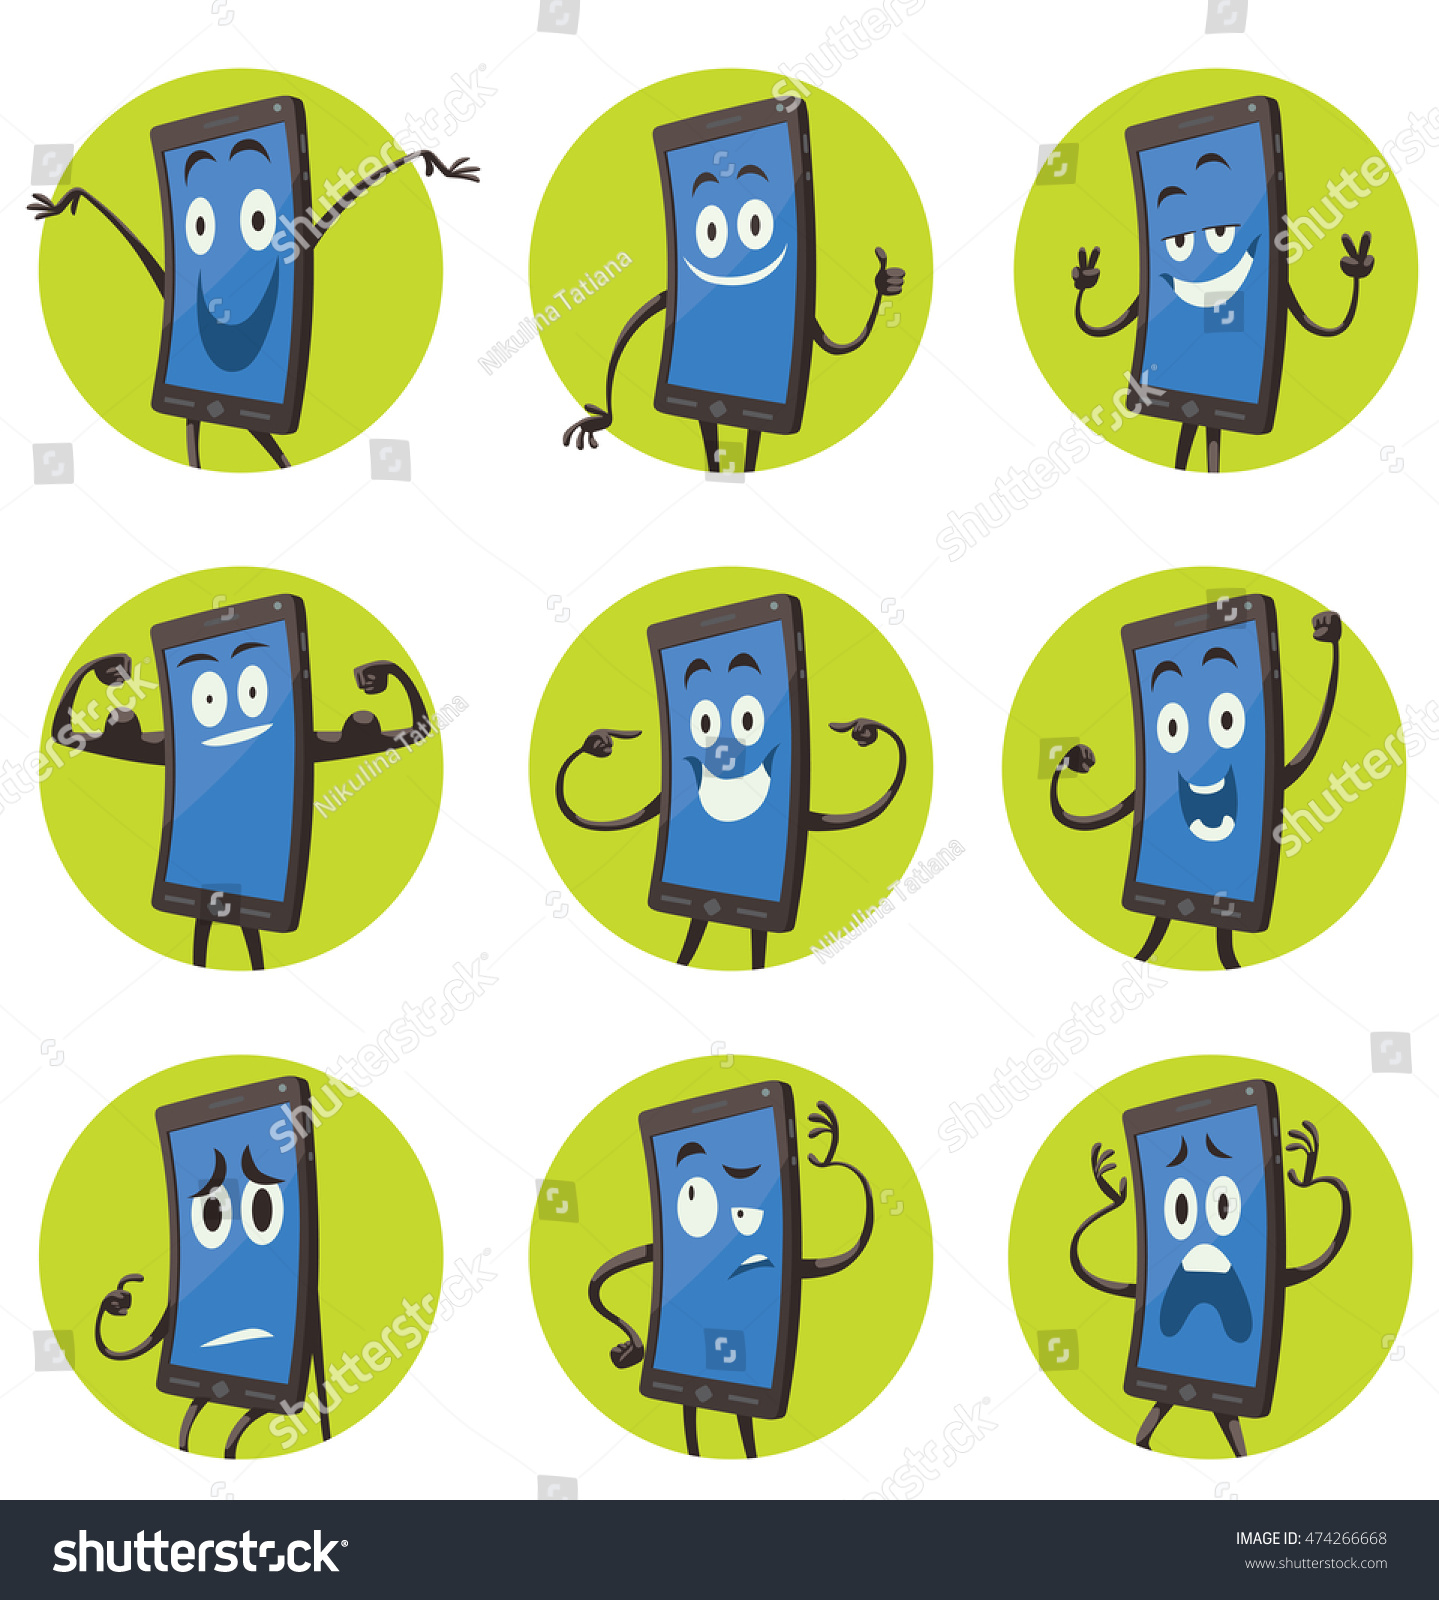 Vector set of round green frames with cartoon images of black smartphones with blue screens with arms and legs with a variety of emotions and actions on a white background. Positive character.  #474266668